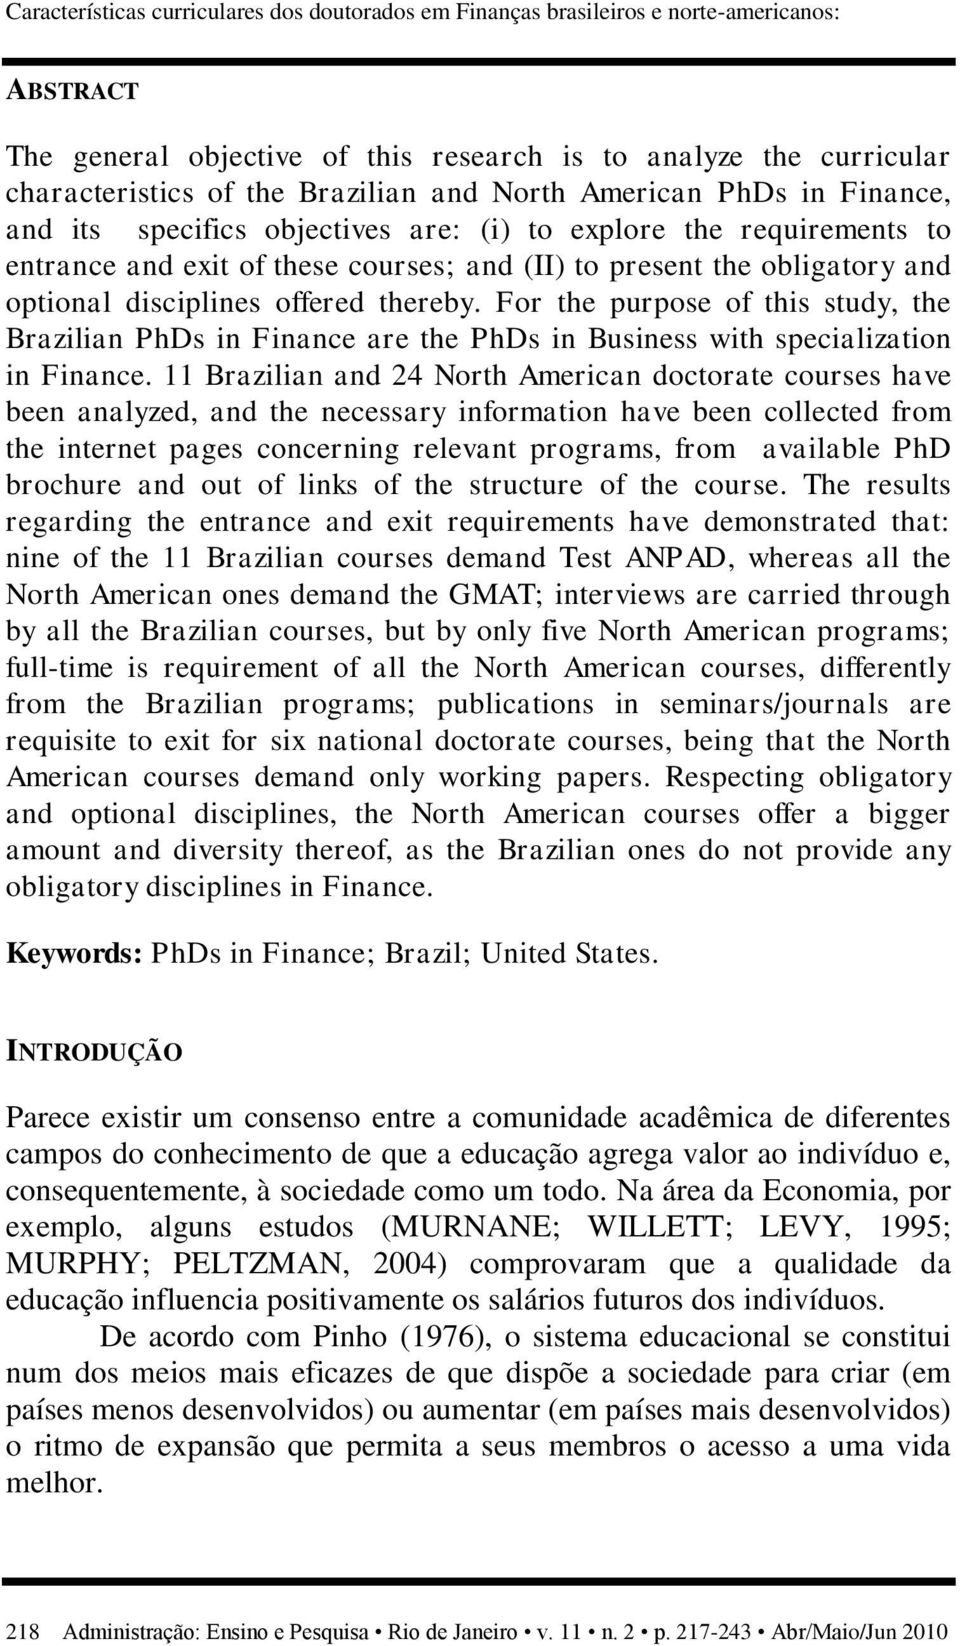 disciplines offered thereby. For the purpose of this study, the Brazilian PhDs in Finance are the PhDs in Business with specialization in Finance.